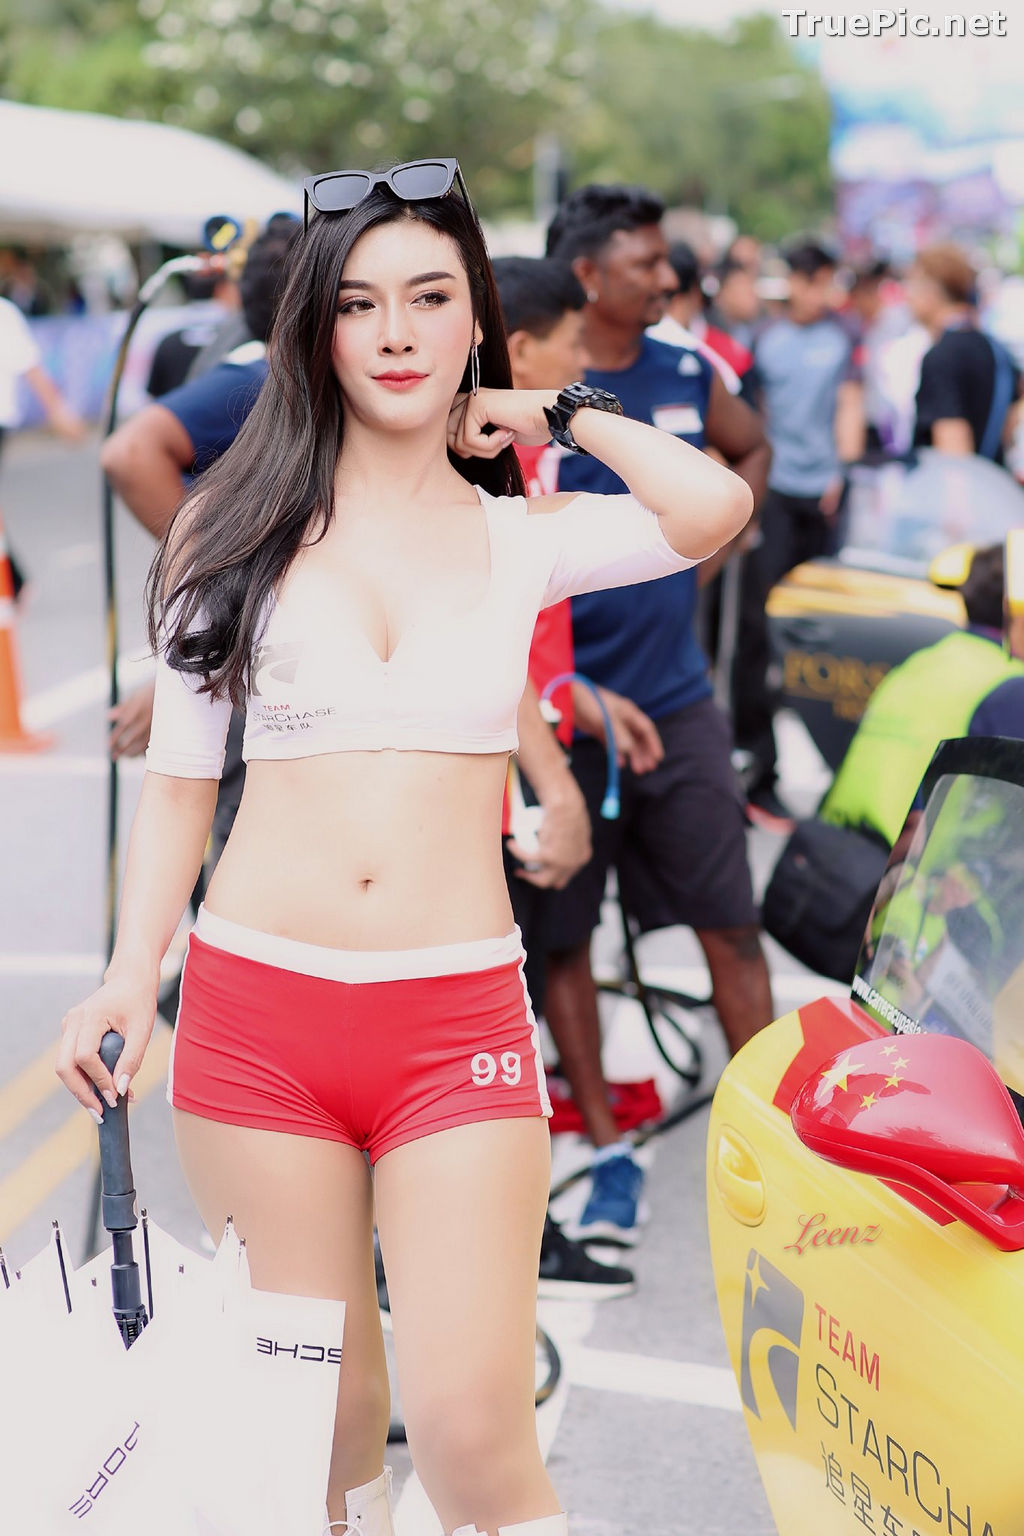 Image Thailand Racing Model - Thailand Showgirl Model Collection #3 - TruePic.net - Picture-64